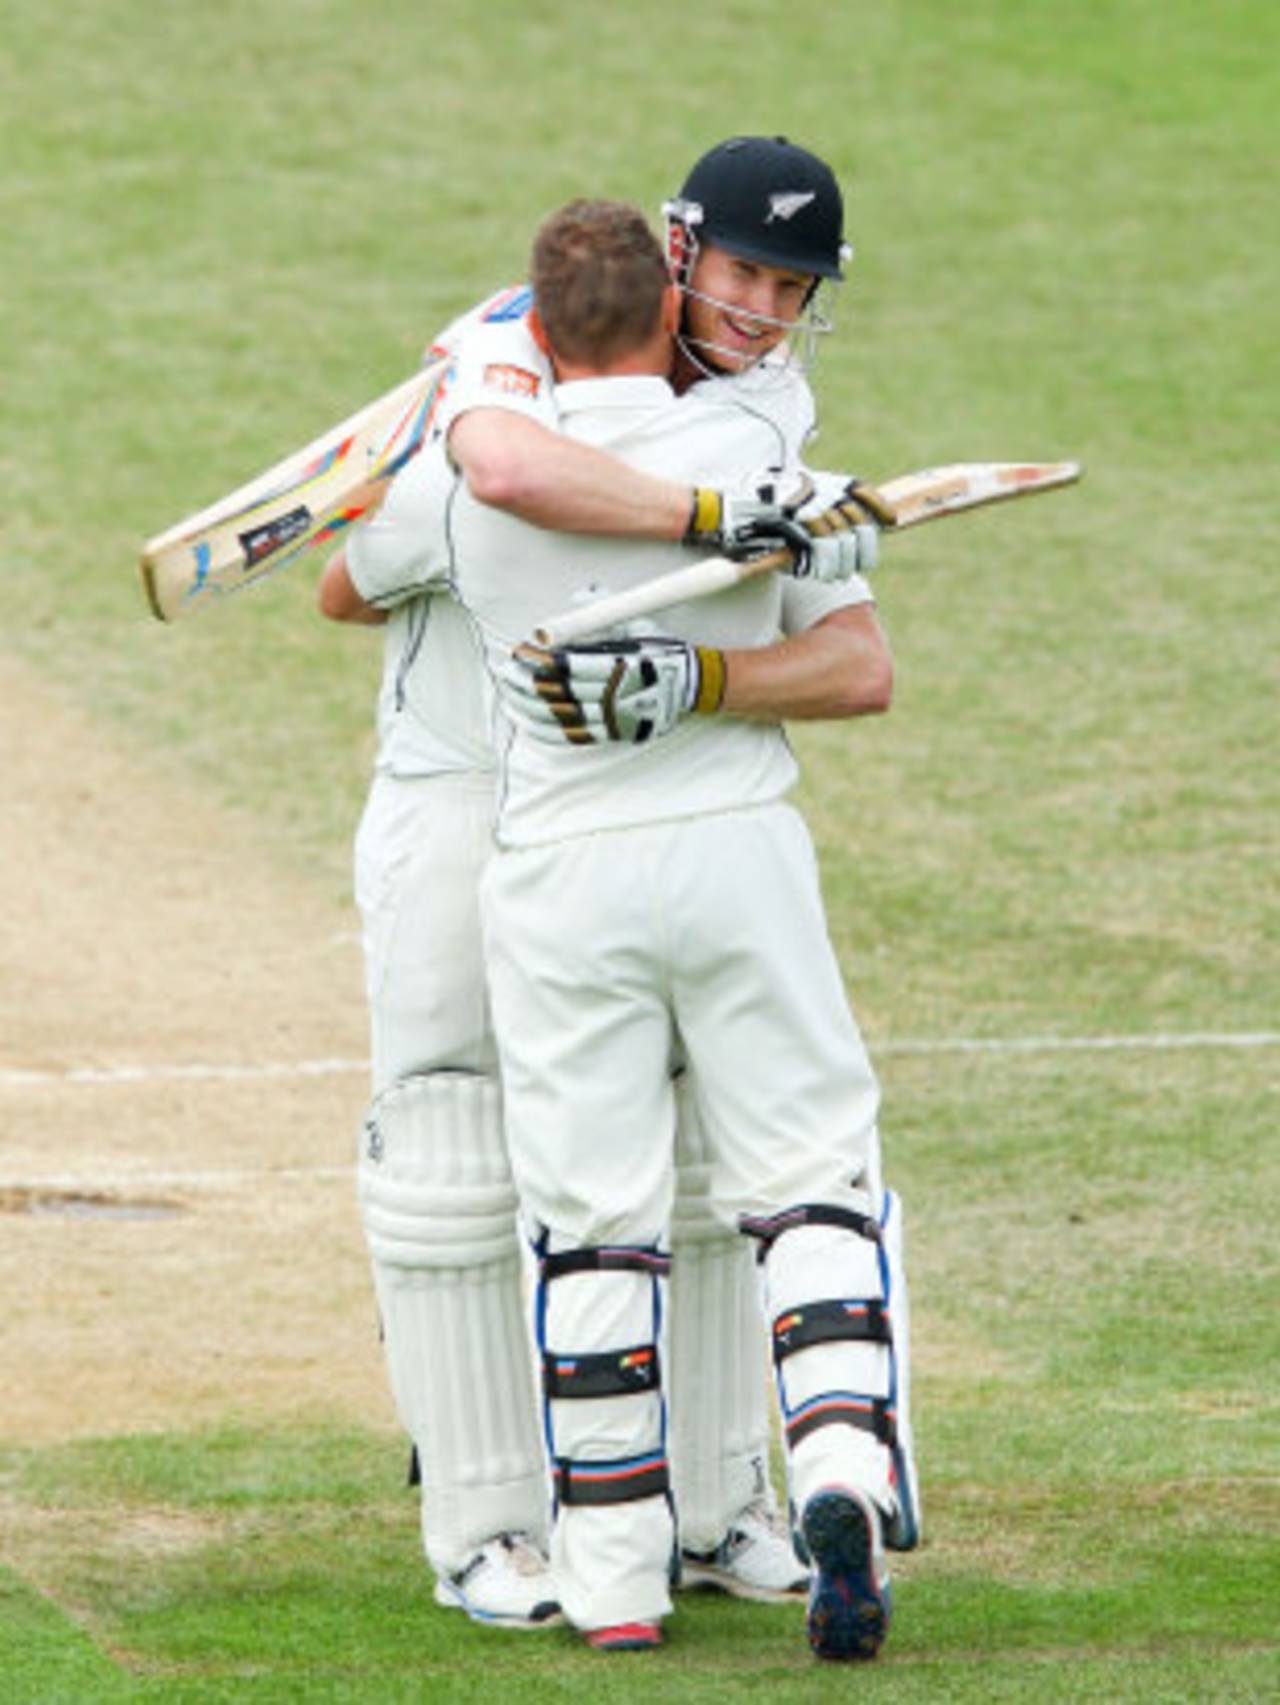 Brendon McCullum and Jimmy Neesham fall into an embrace, New Zealand v India, 2nd Test, Wellington, 5th day, February 18, 2014